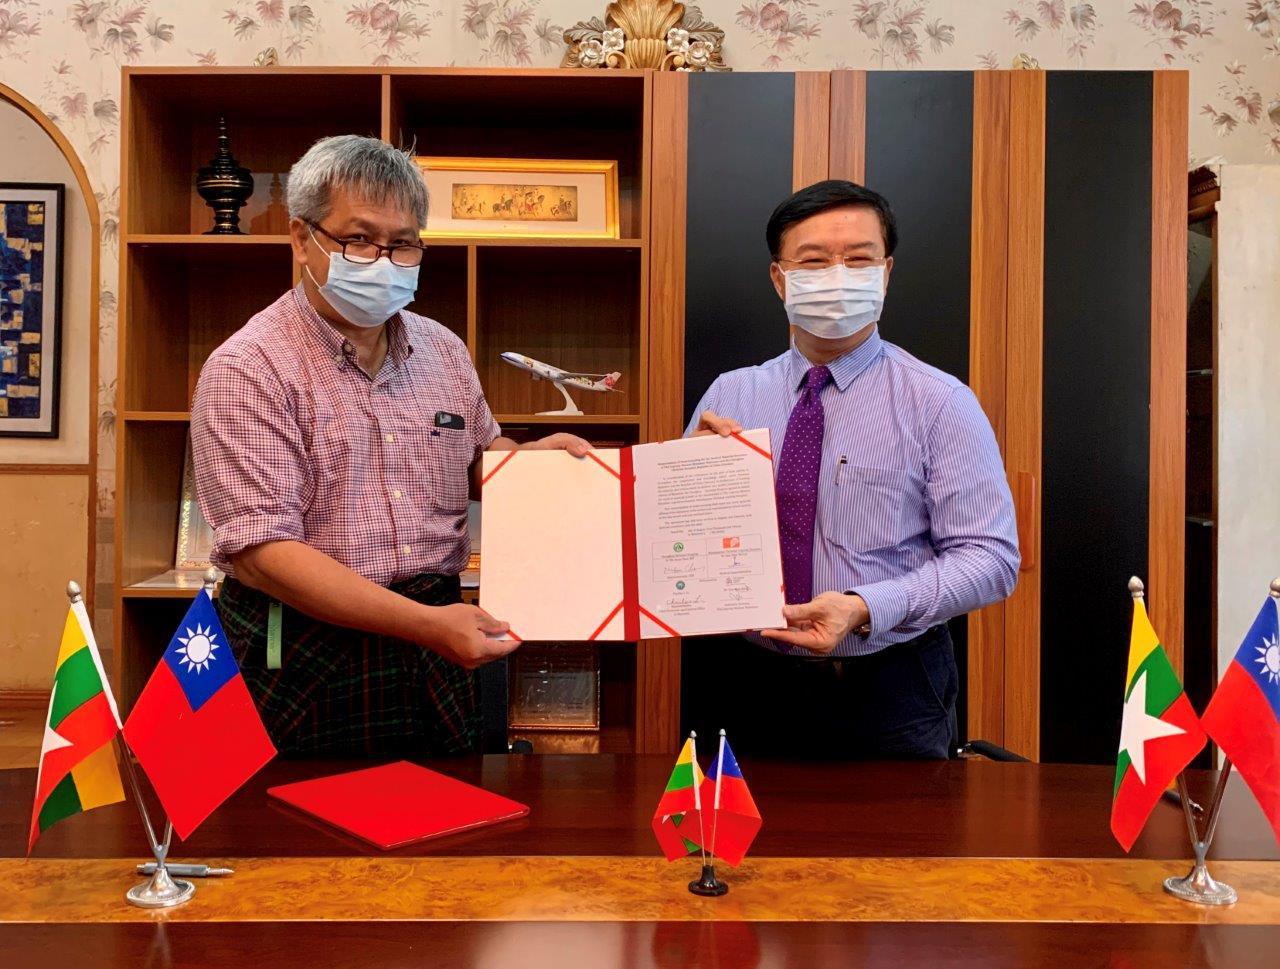 Donation MOU was signed by Dr Zaw Moe Aung, executive director of The Leprosy Mission Myanmar and Charles C. Li, the representative of Taipei Economic and Cultural Office